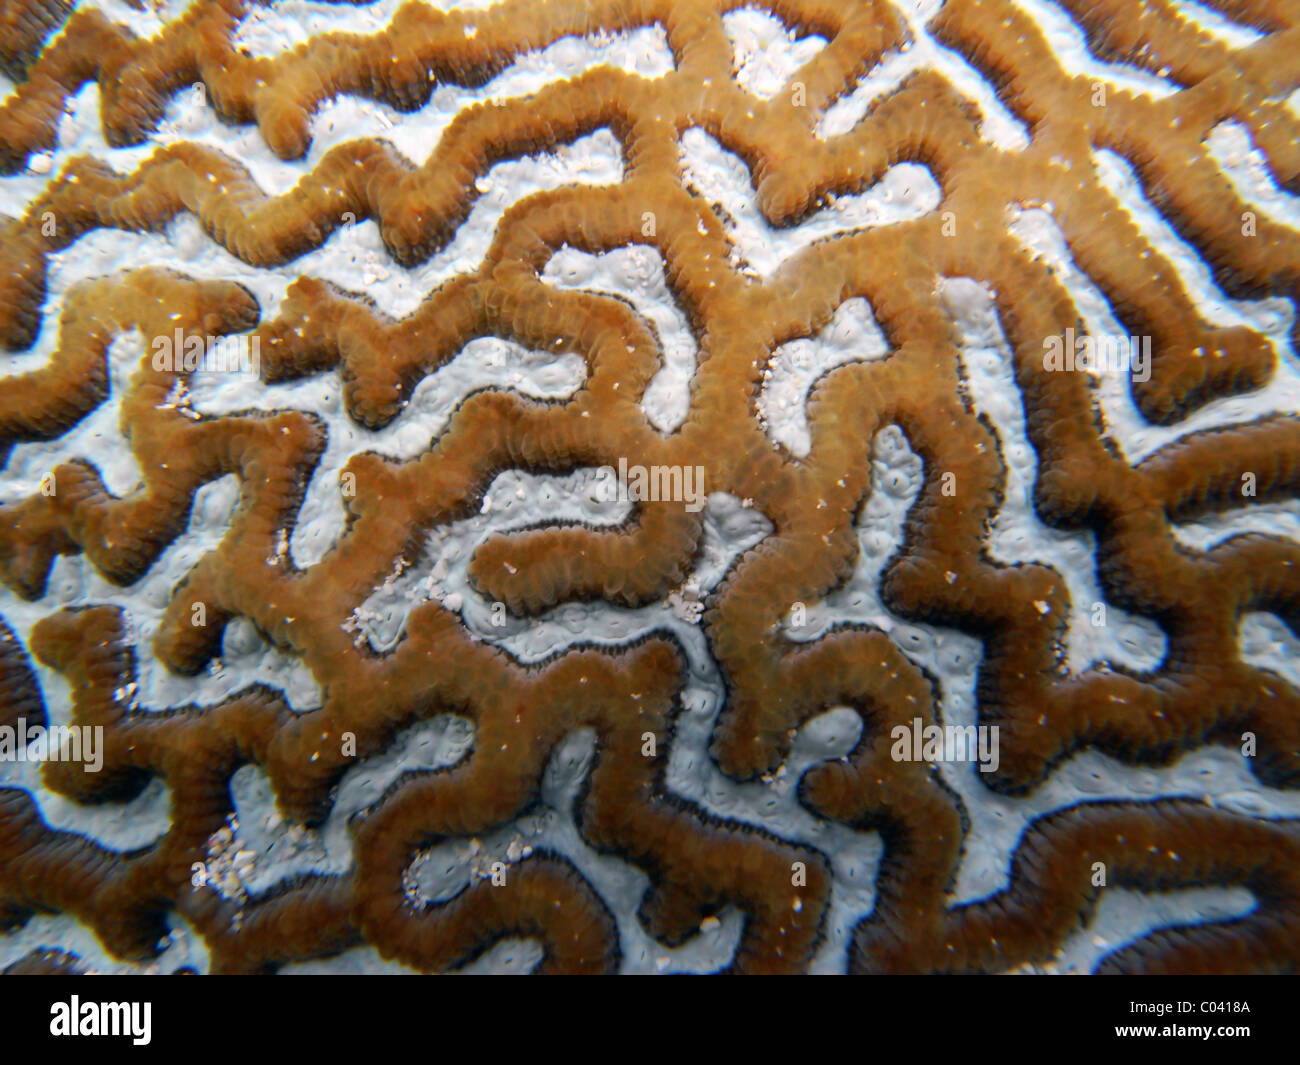 Detail of live coral colony (Platygyra sp.?) on reef flat at North West Island, Great Barrier Reef Marine Park, Australia Stock Photo